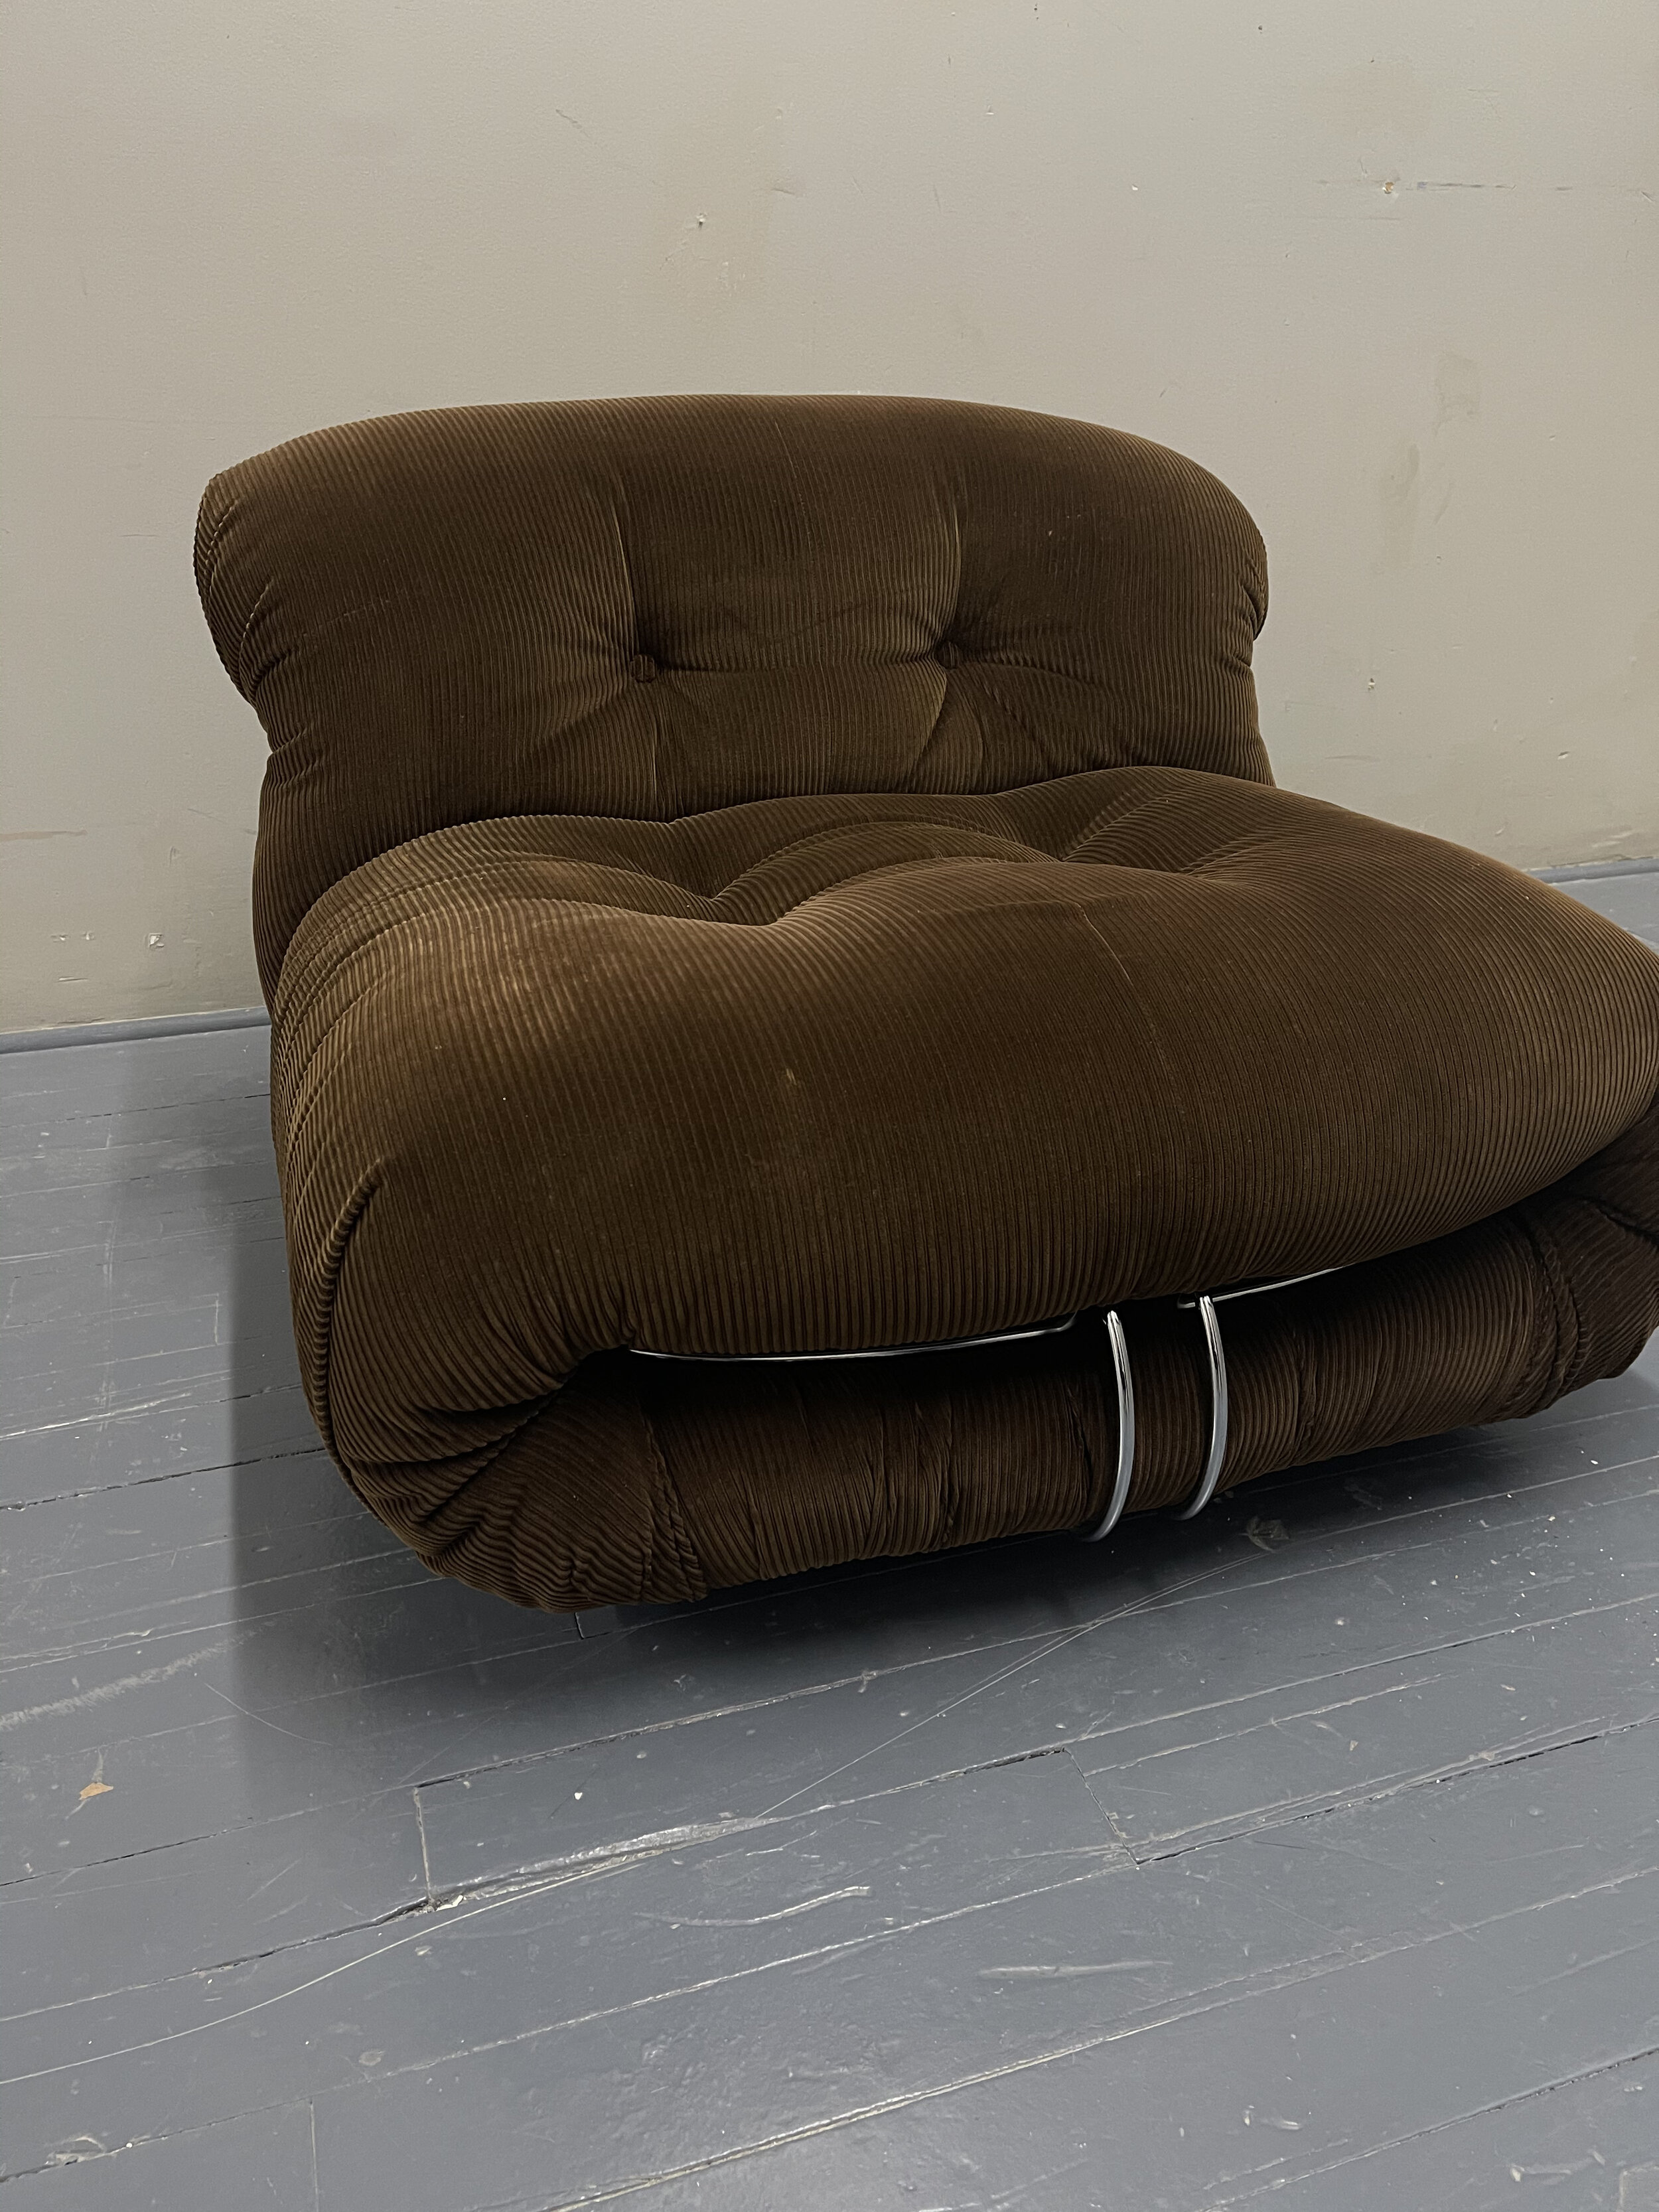 Vintage Soriana Chair Brown Fabric Corduroy, design Tobia Scarpa for Cassina 1970s view of the metal structure